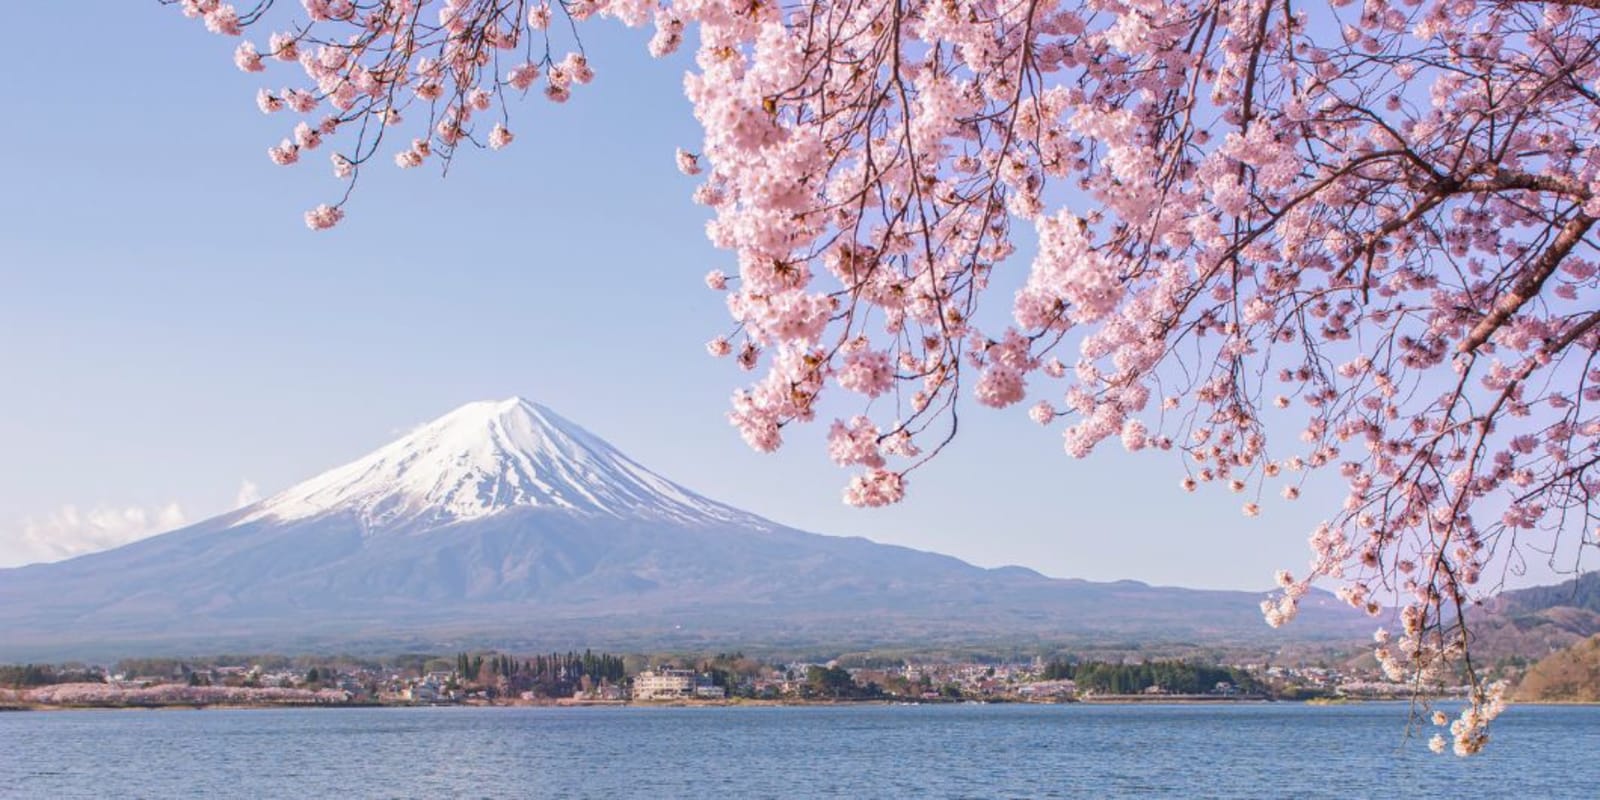 A view of Mount Fuji in Japan with a cherry blossom tree in the fore ground